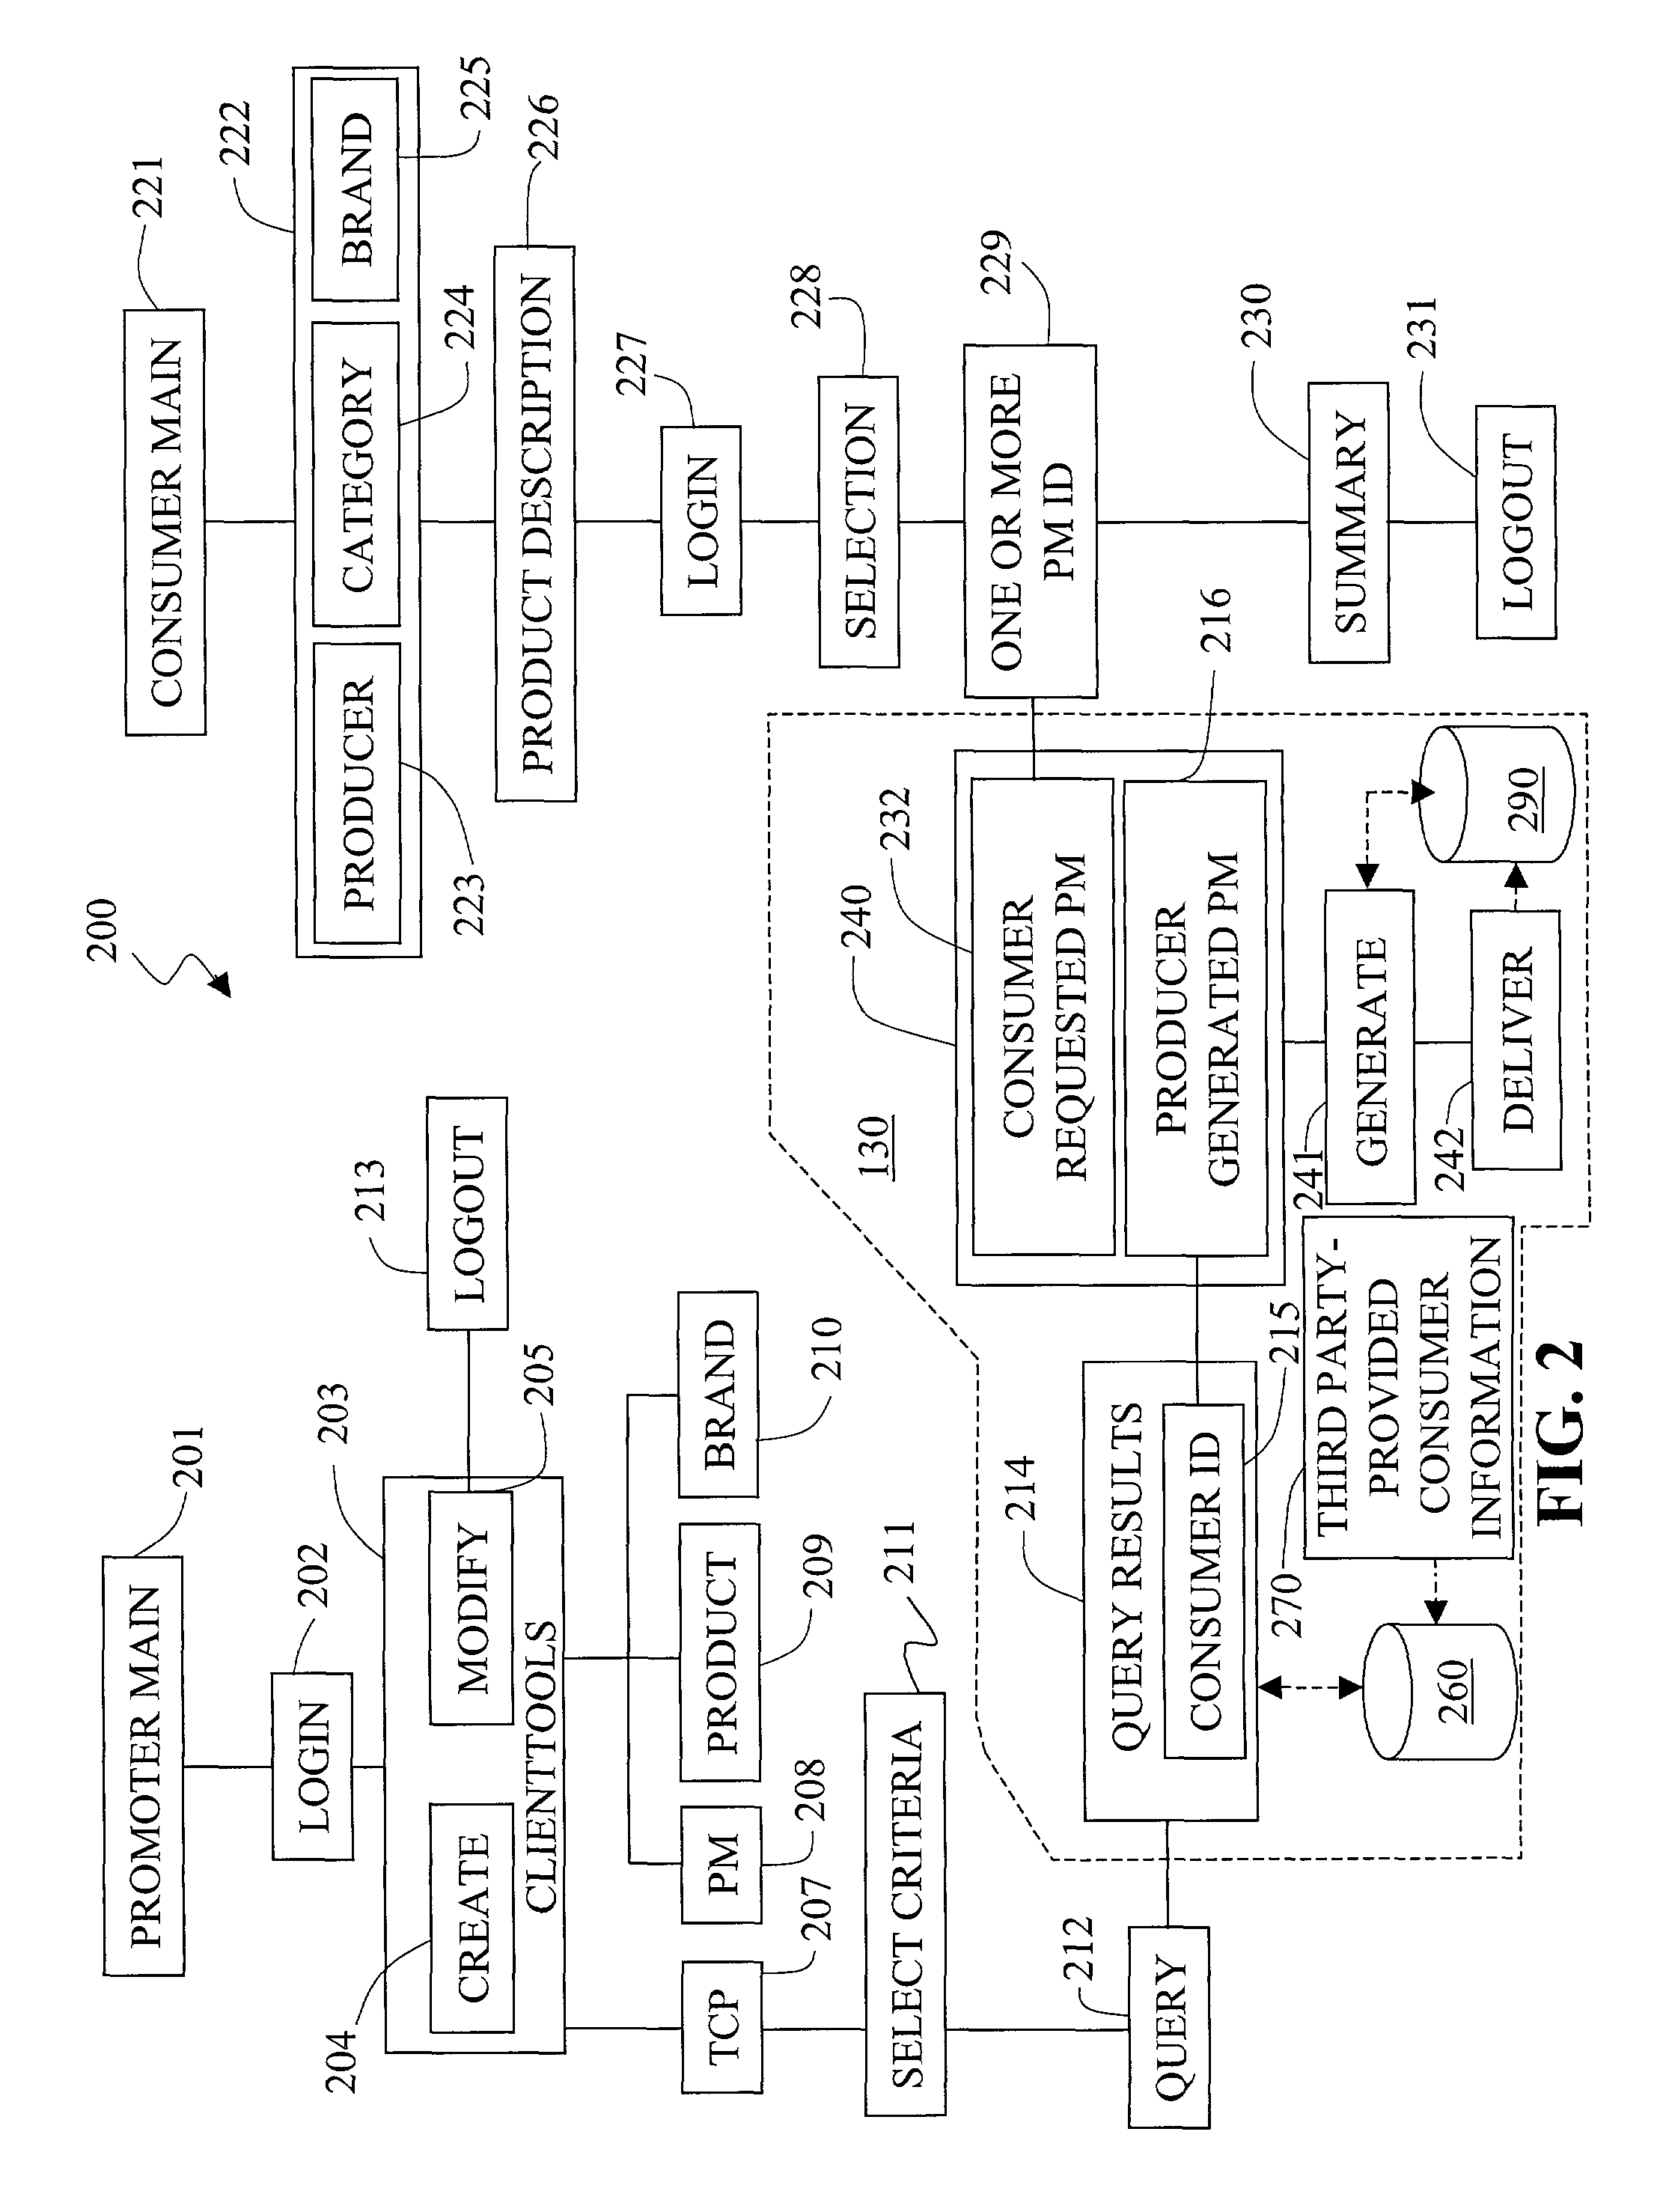 Promotional data delivery system and method